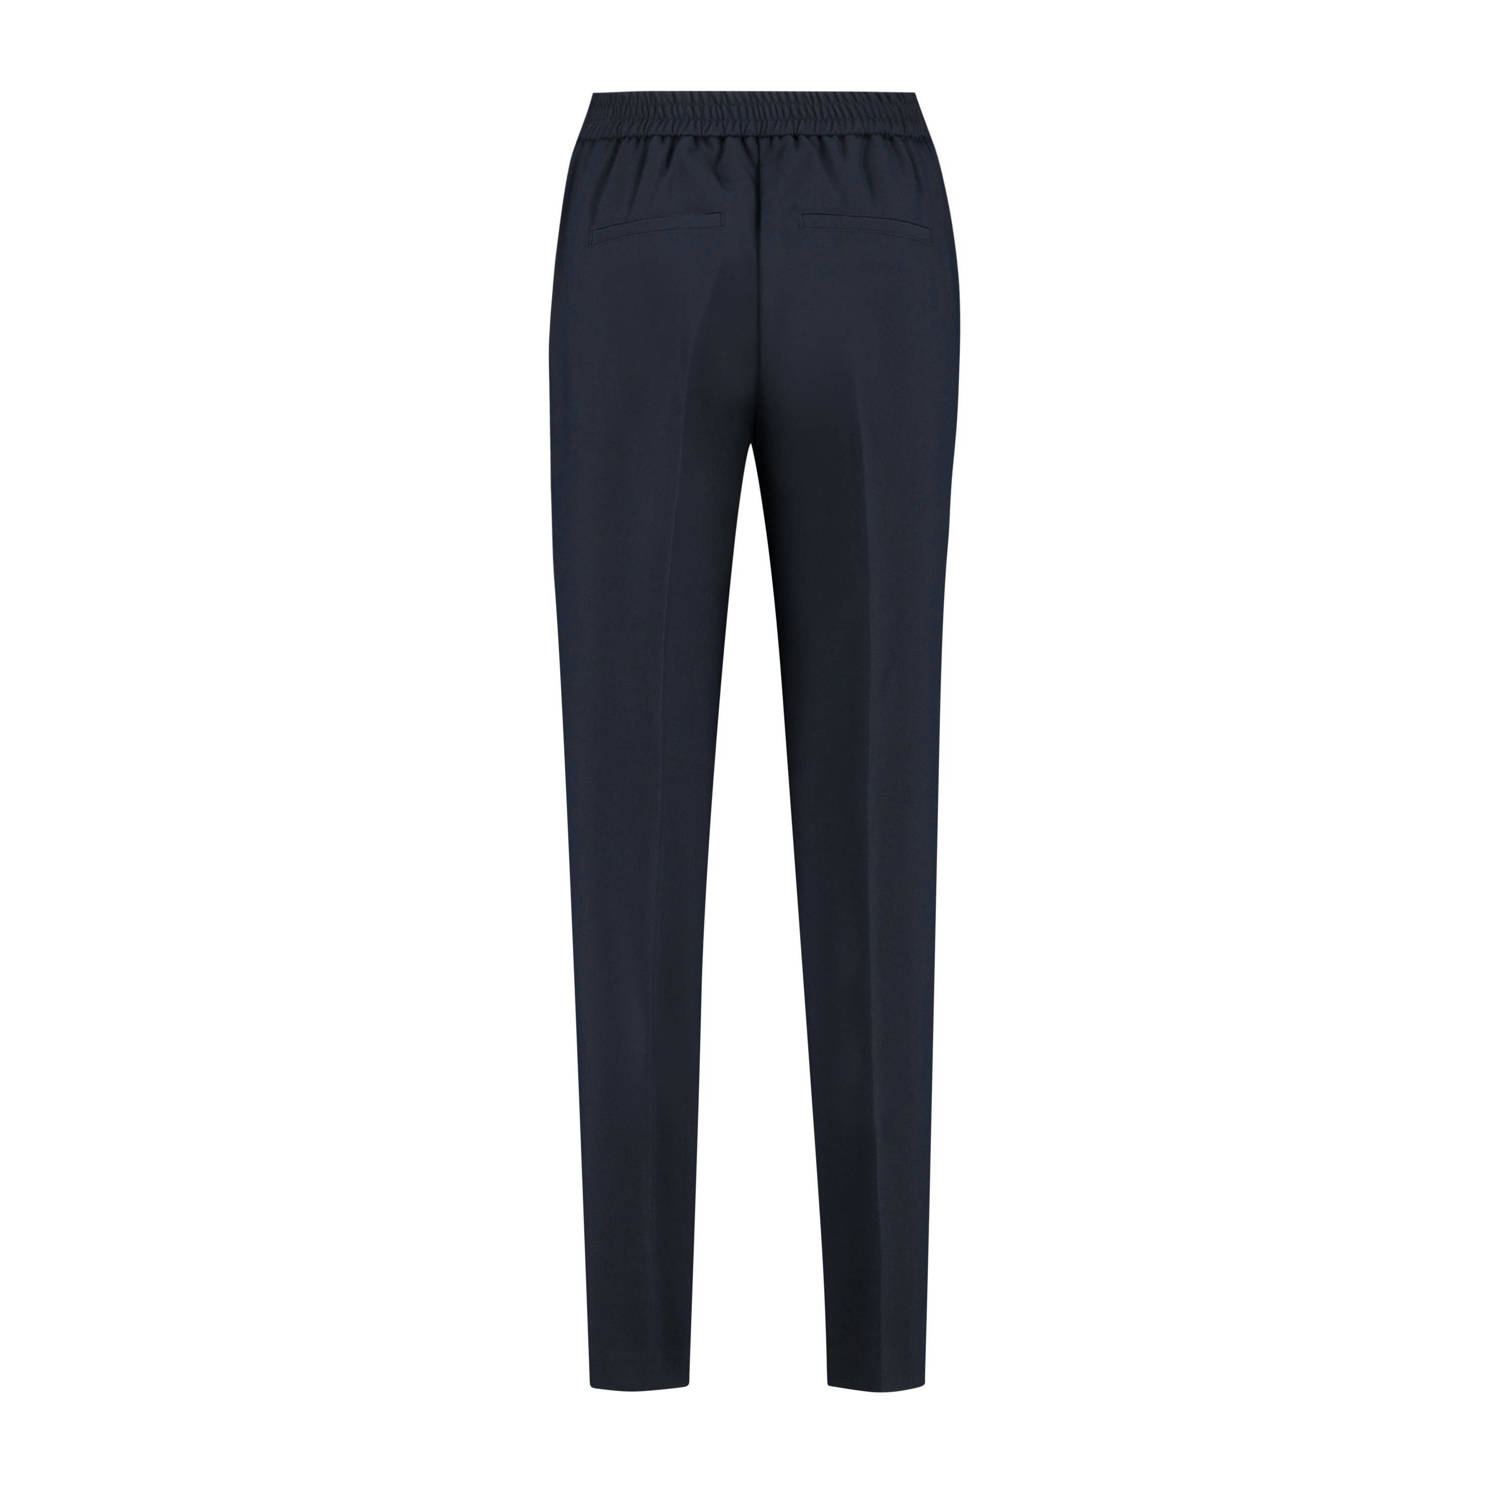 Expresso tapered fit pantalon donkerblauw